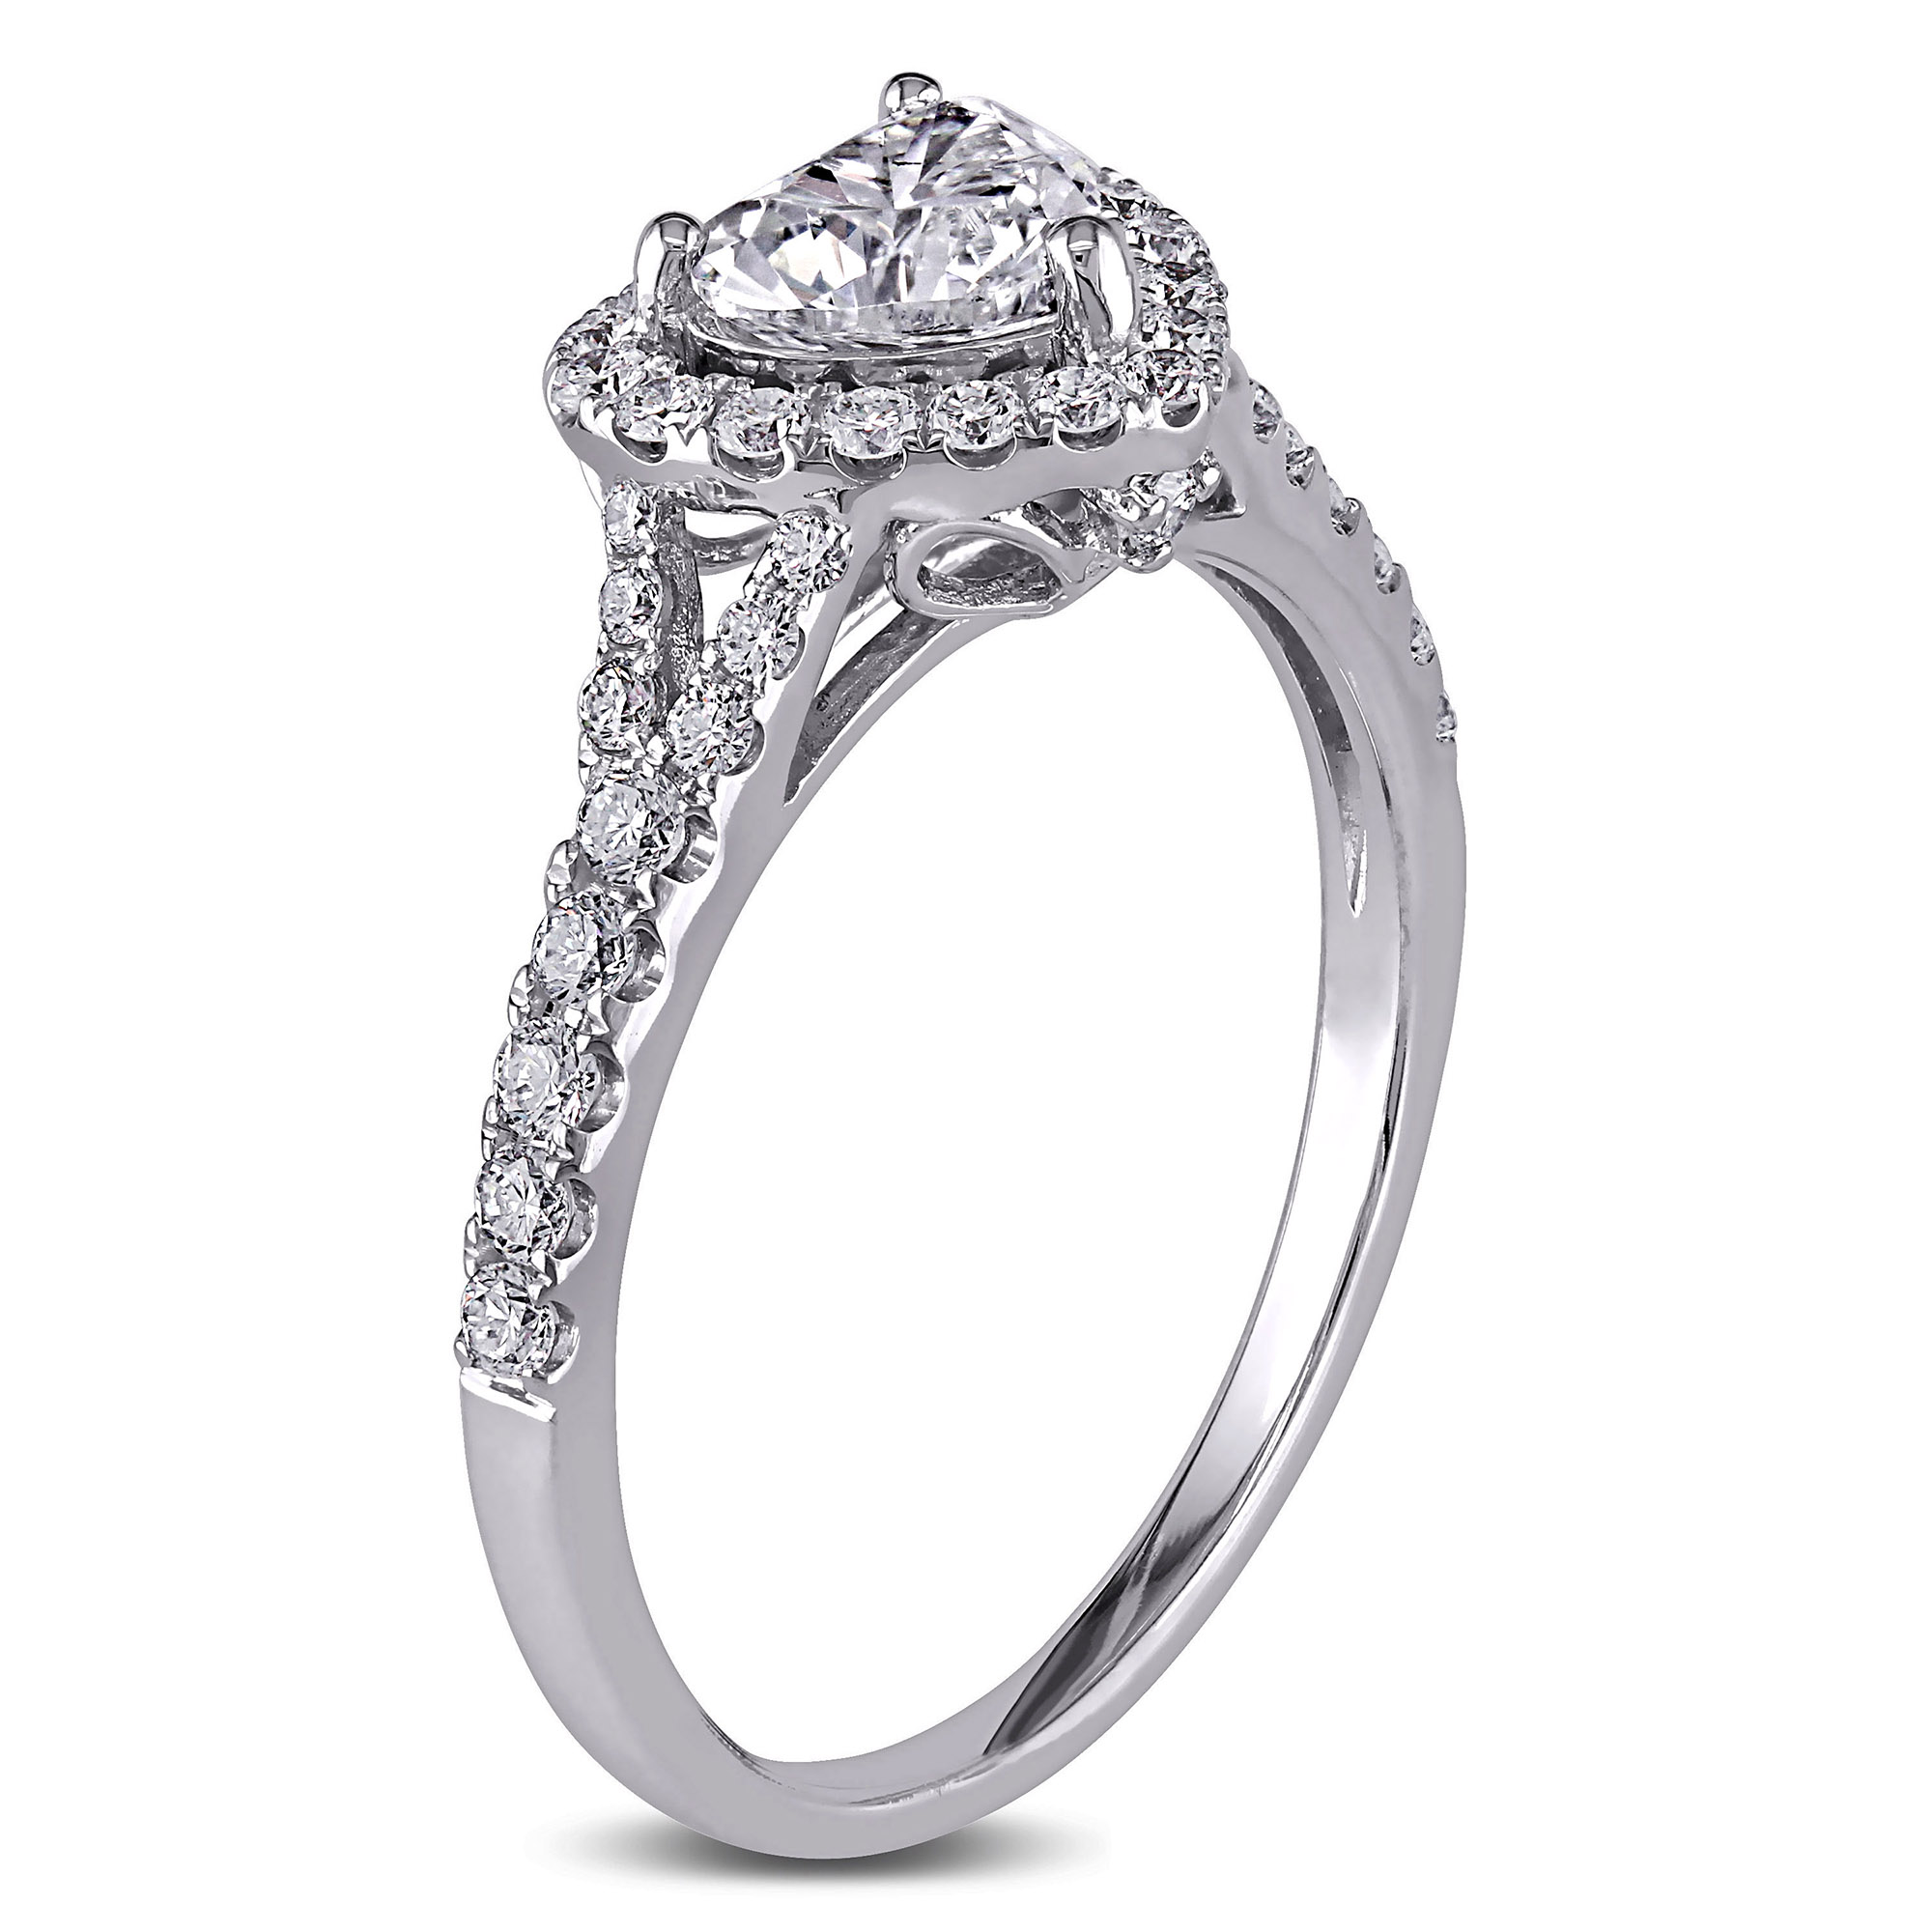 1 1/10 CT TW Certified Diamond Heart Halo Engagement Ring in 14k White Gold